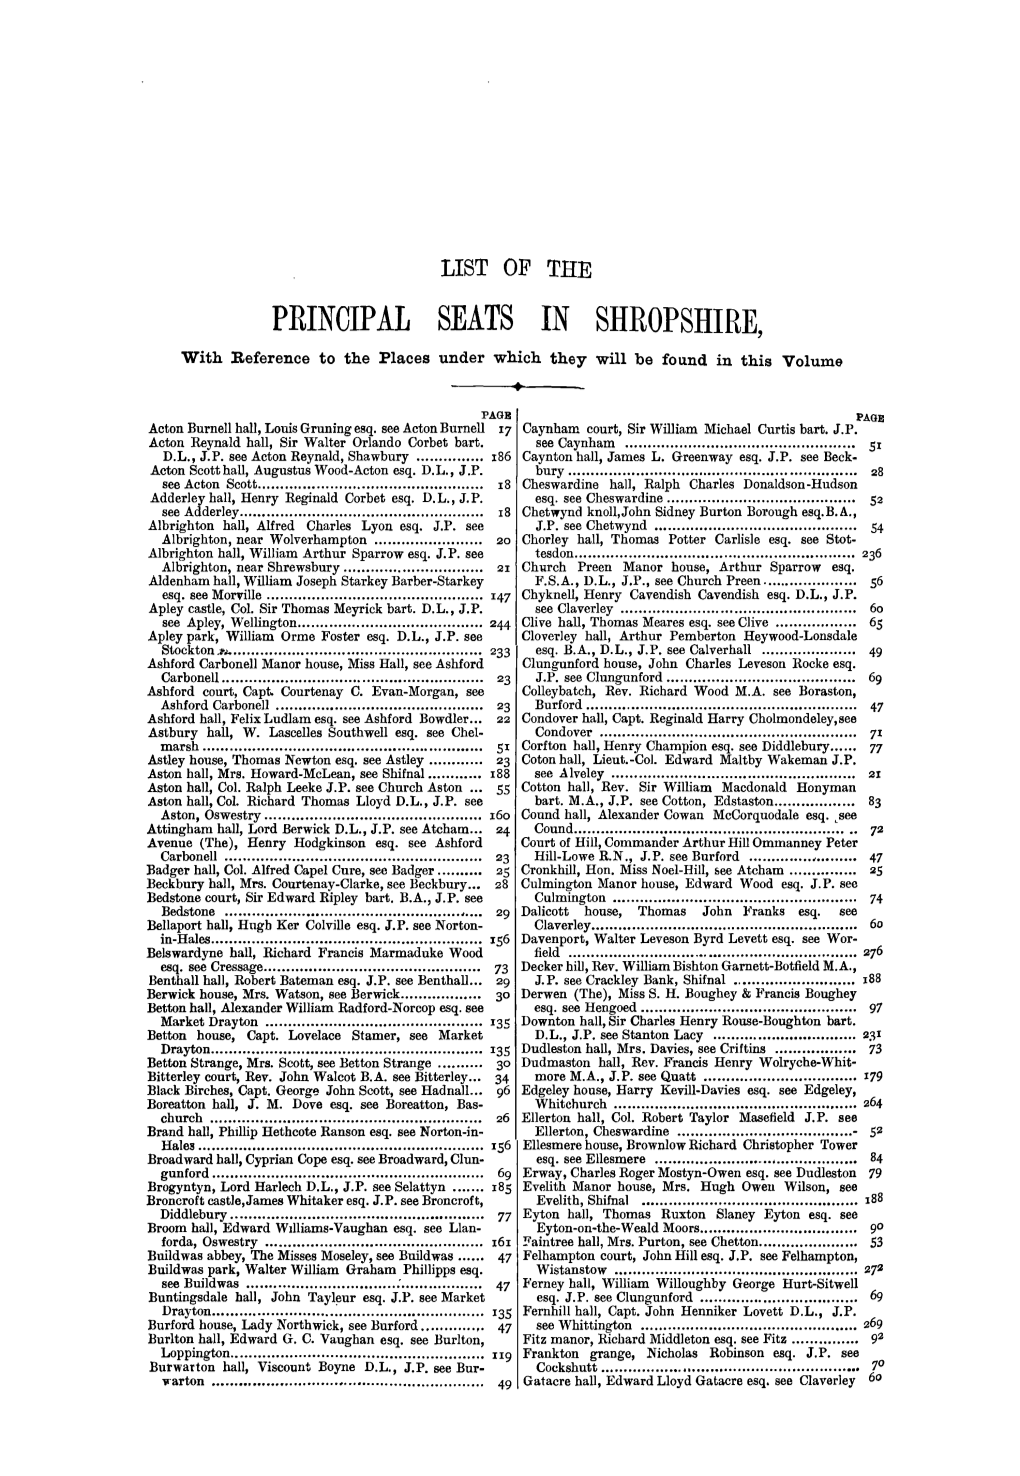 LIST of the PRINCIPAL SEATS in SHROPSHIRE, with Reference to the Places Under Which They Will Be Found in This Volume ----+